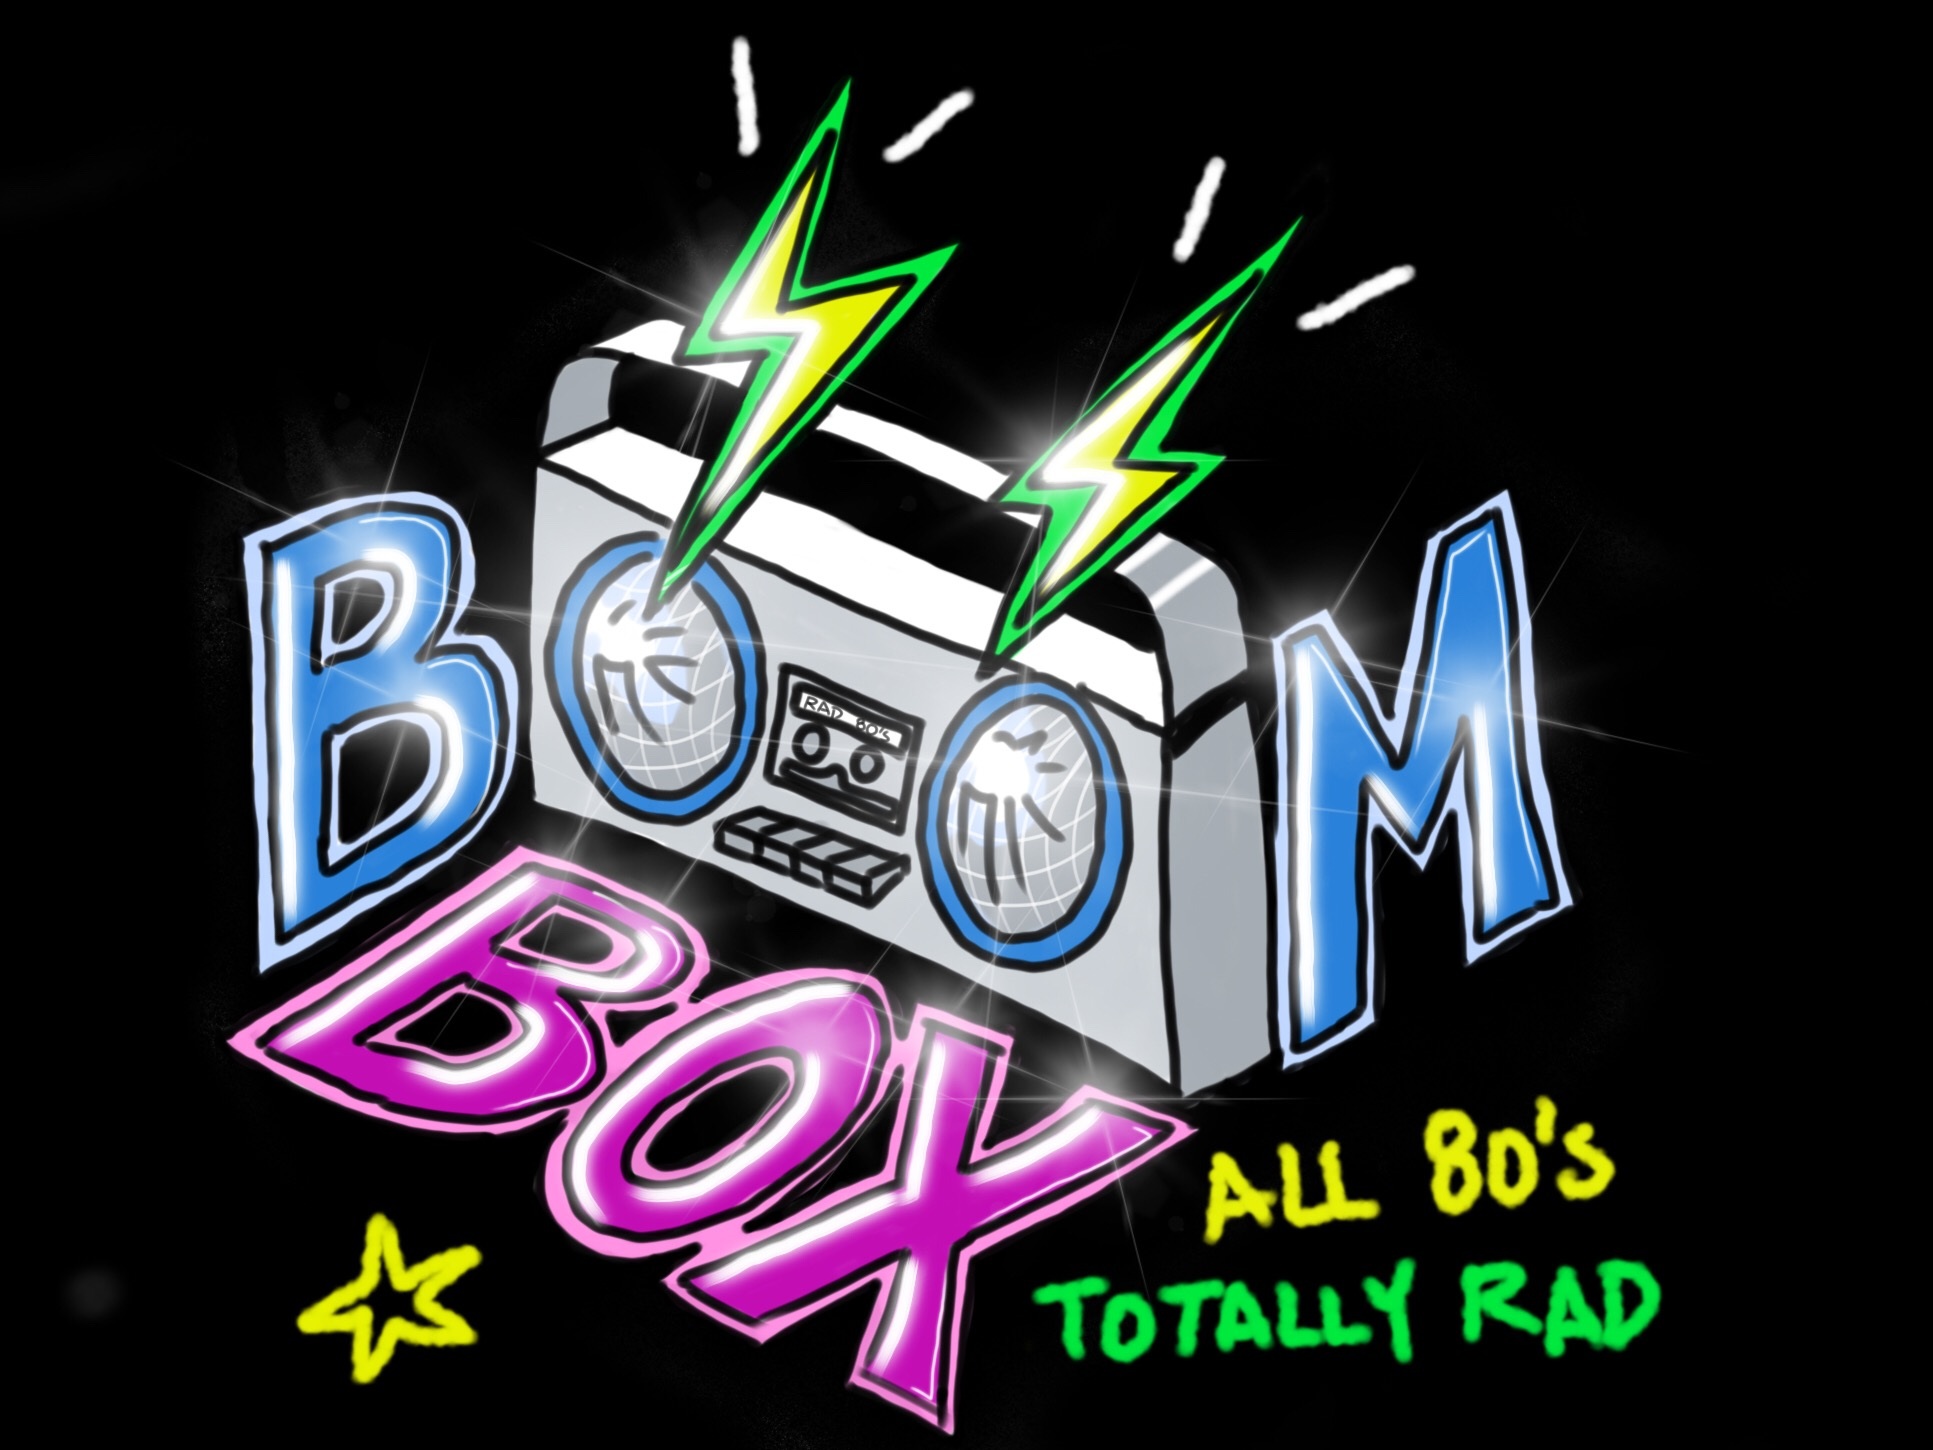 About Us — BOOMBOX!